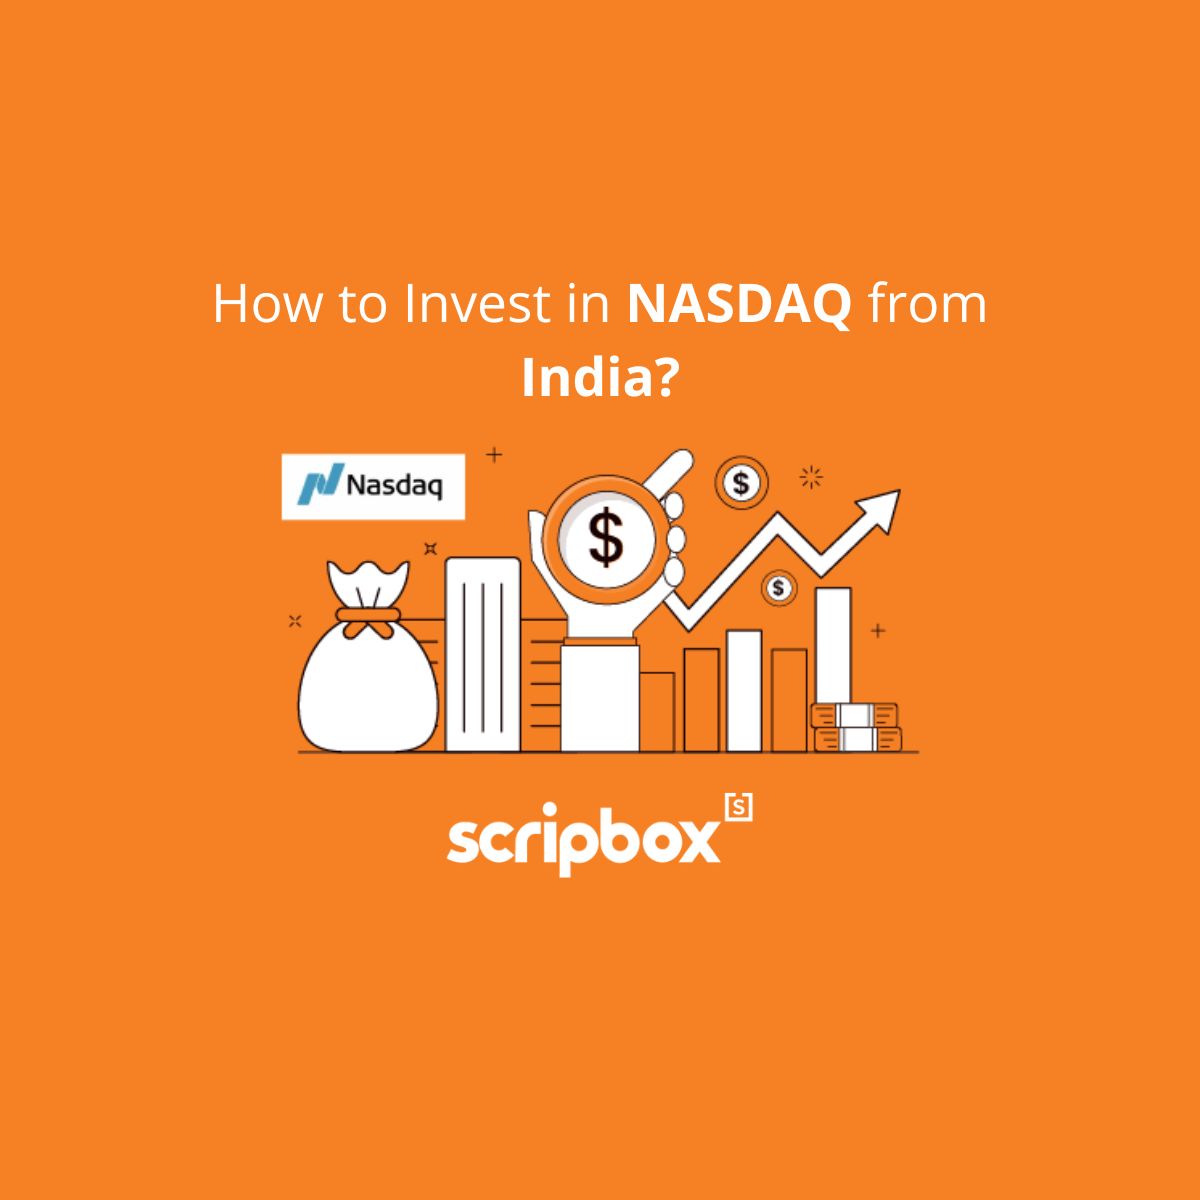 how to invest in nasdaq from india